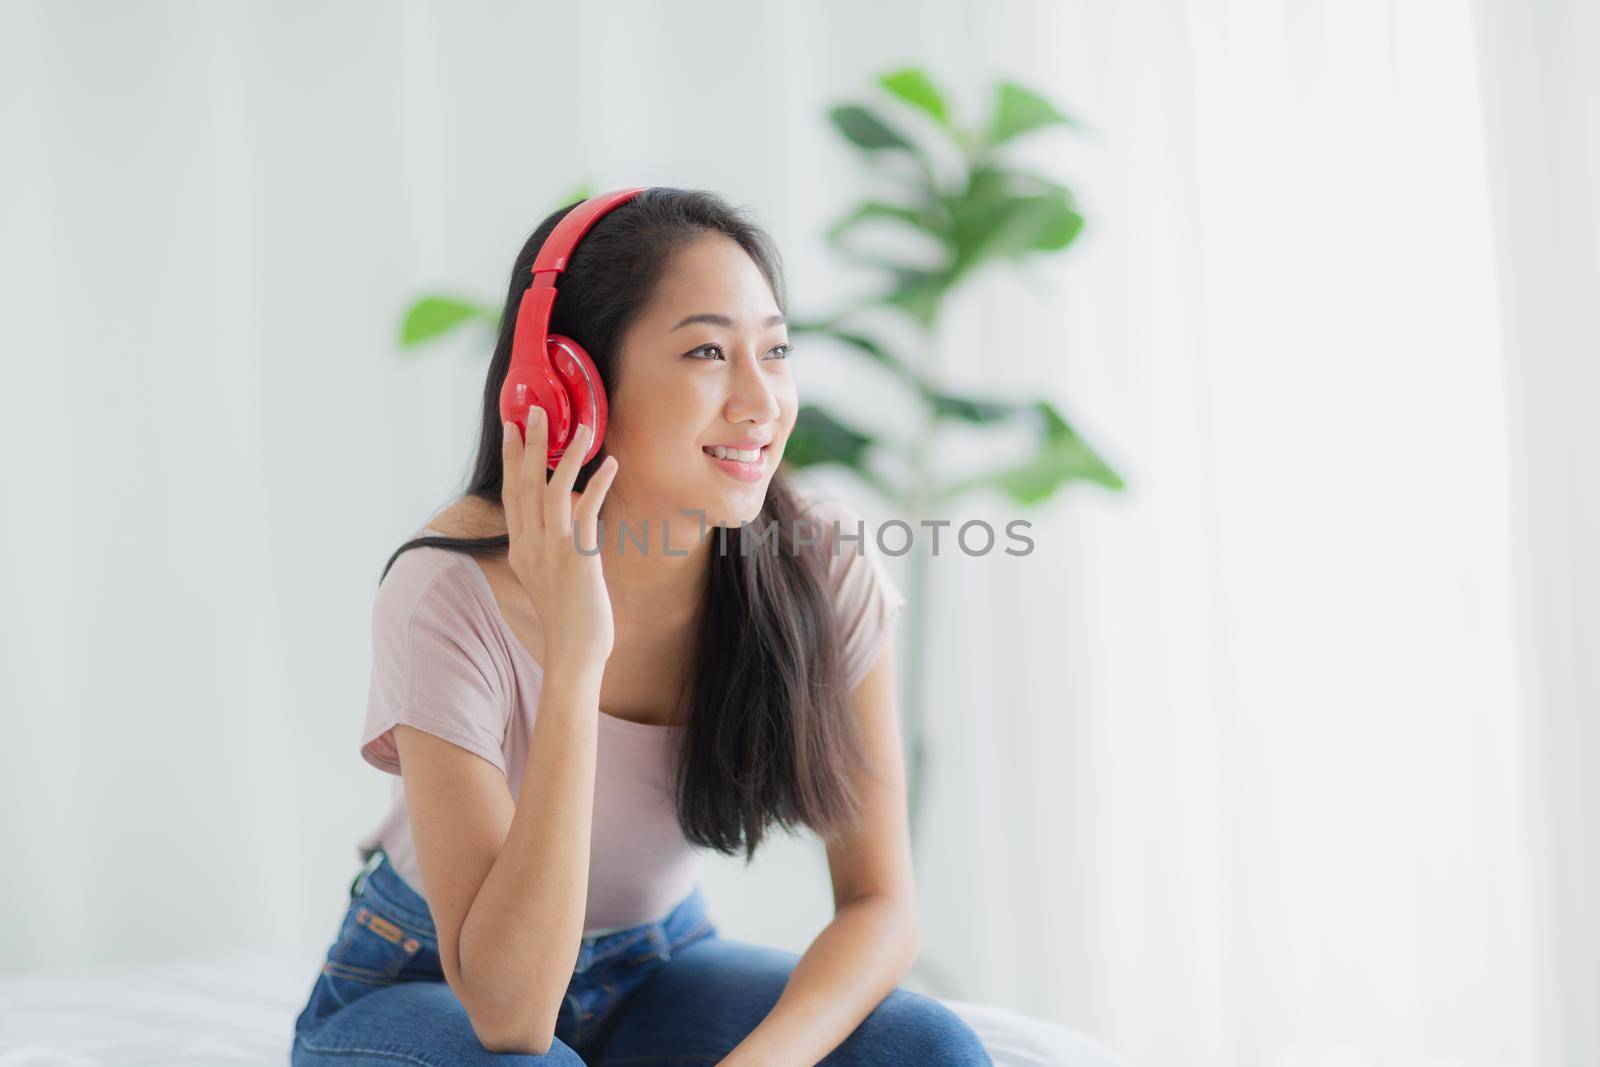 Beautiful women smile happily and relax while listening to music with headphones.